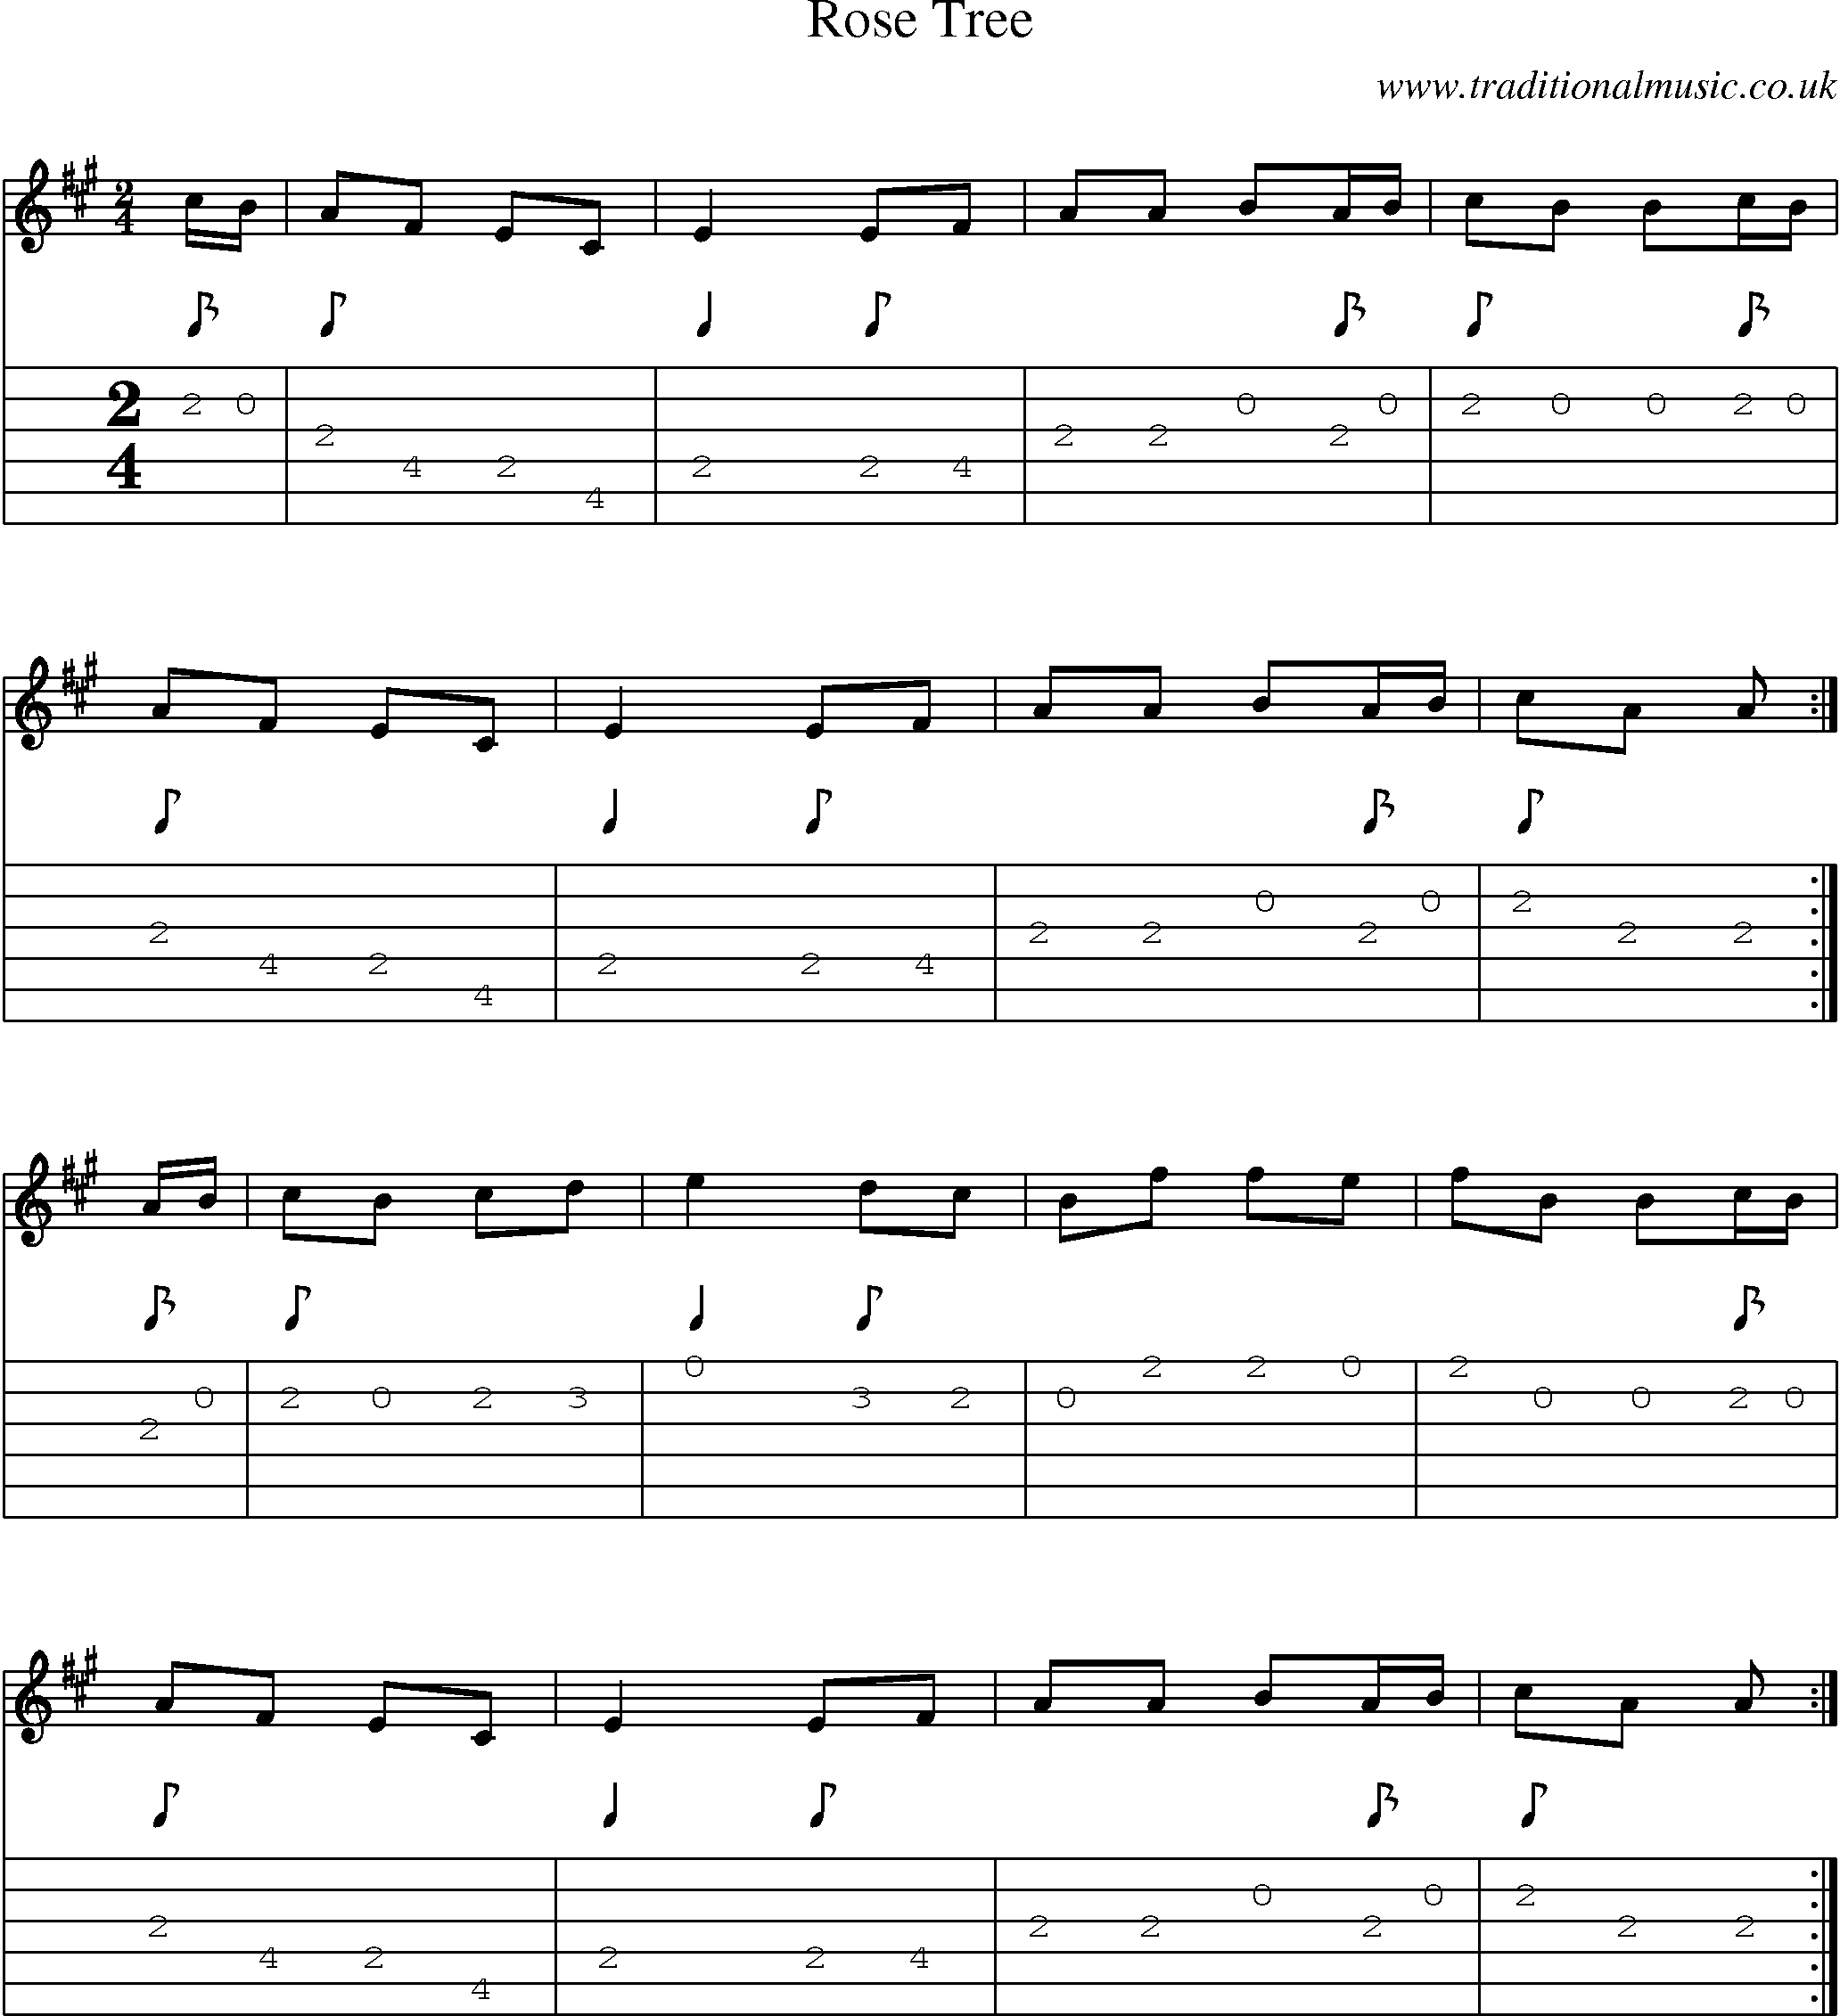 Music Score and Guitar Tabs for Rose Tree